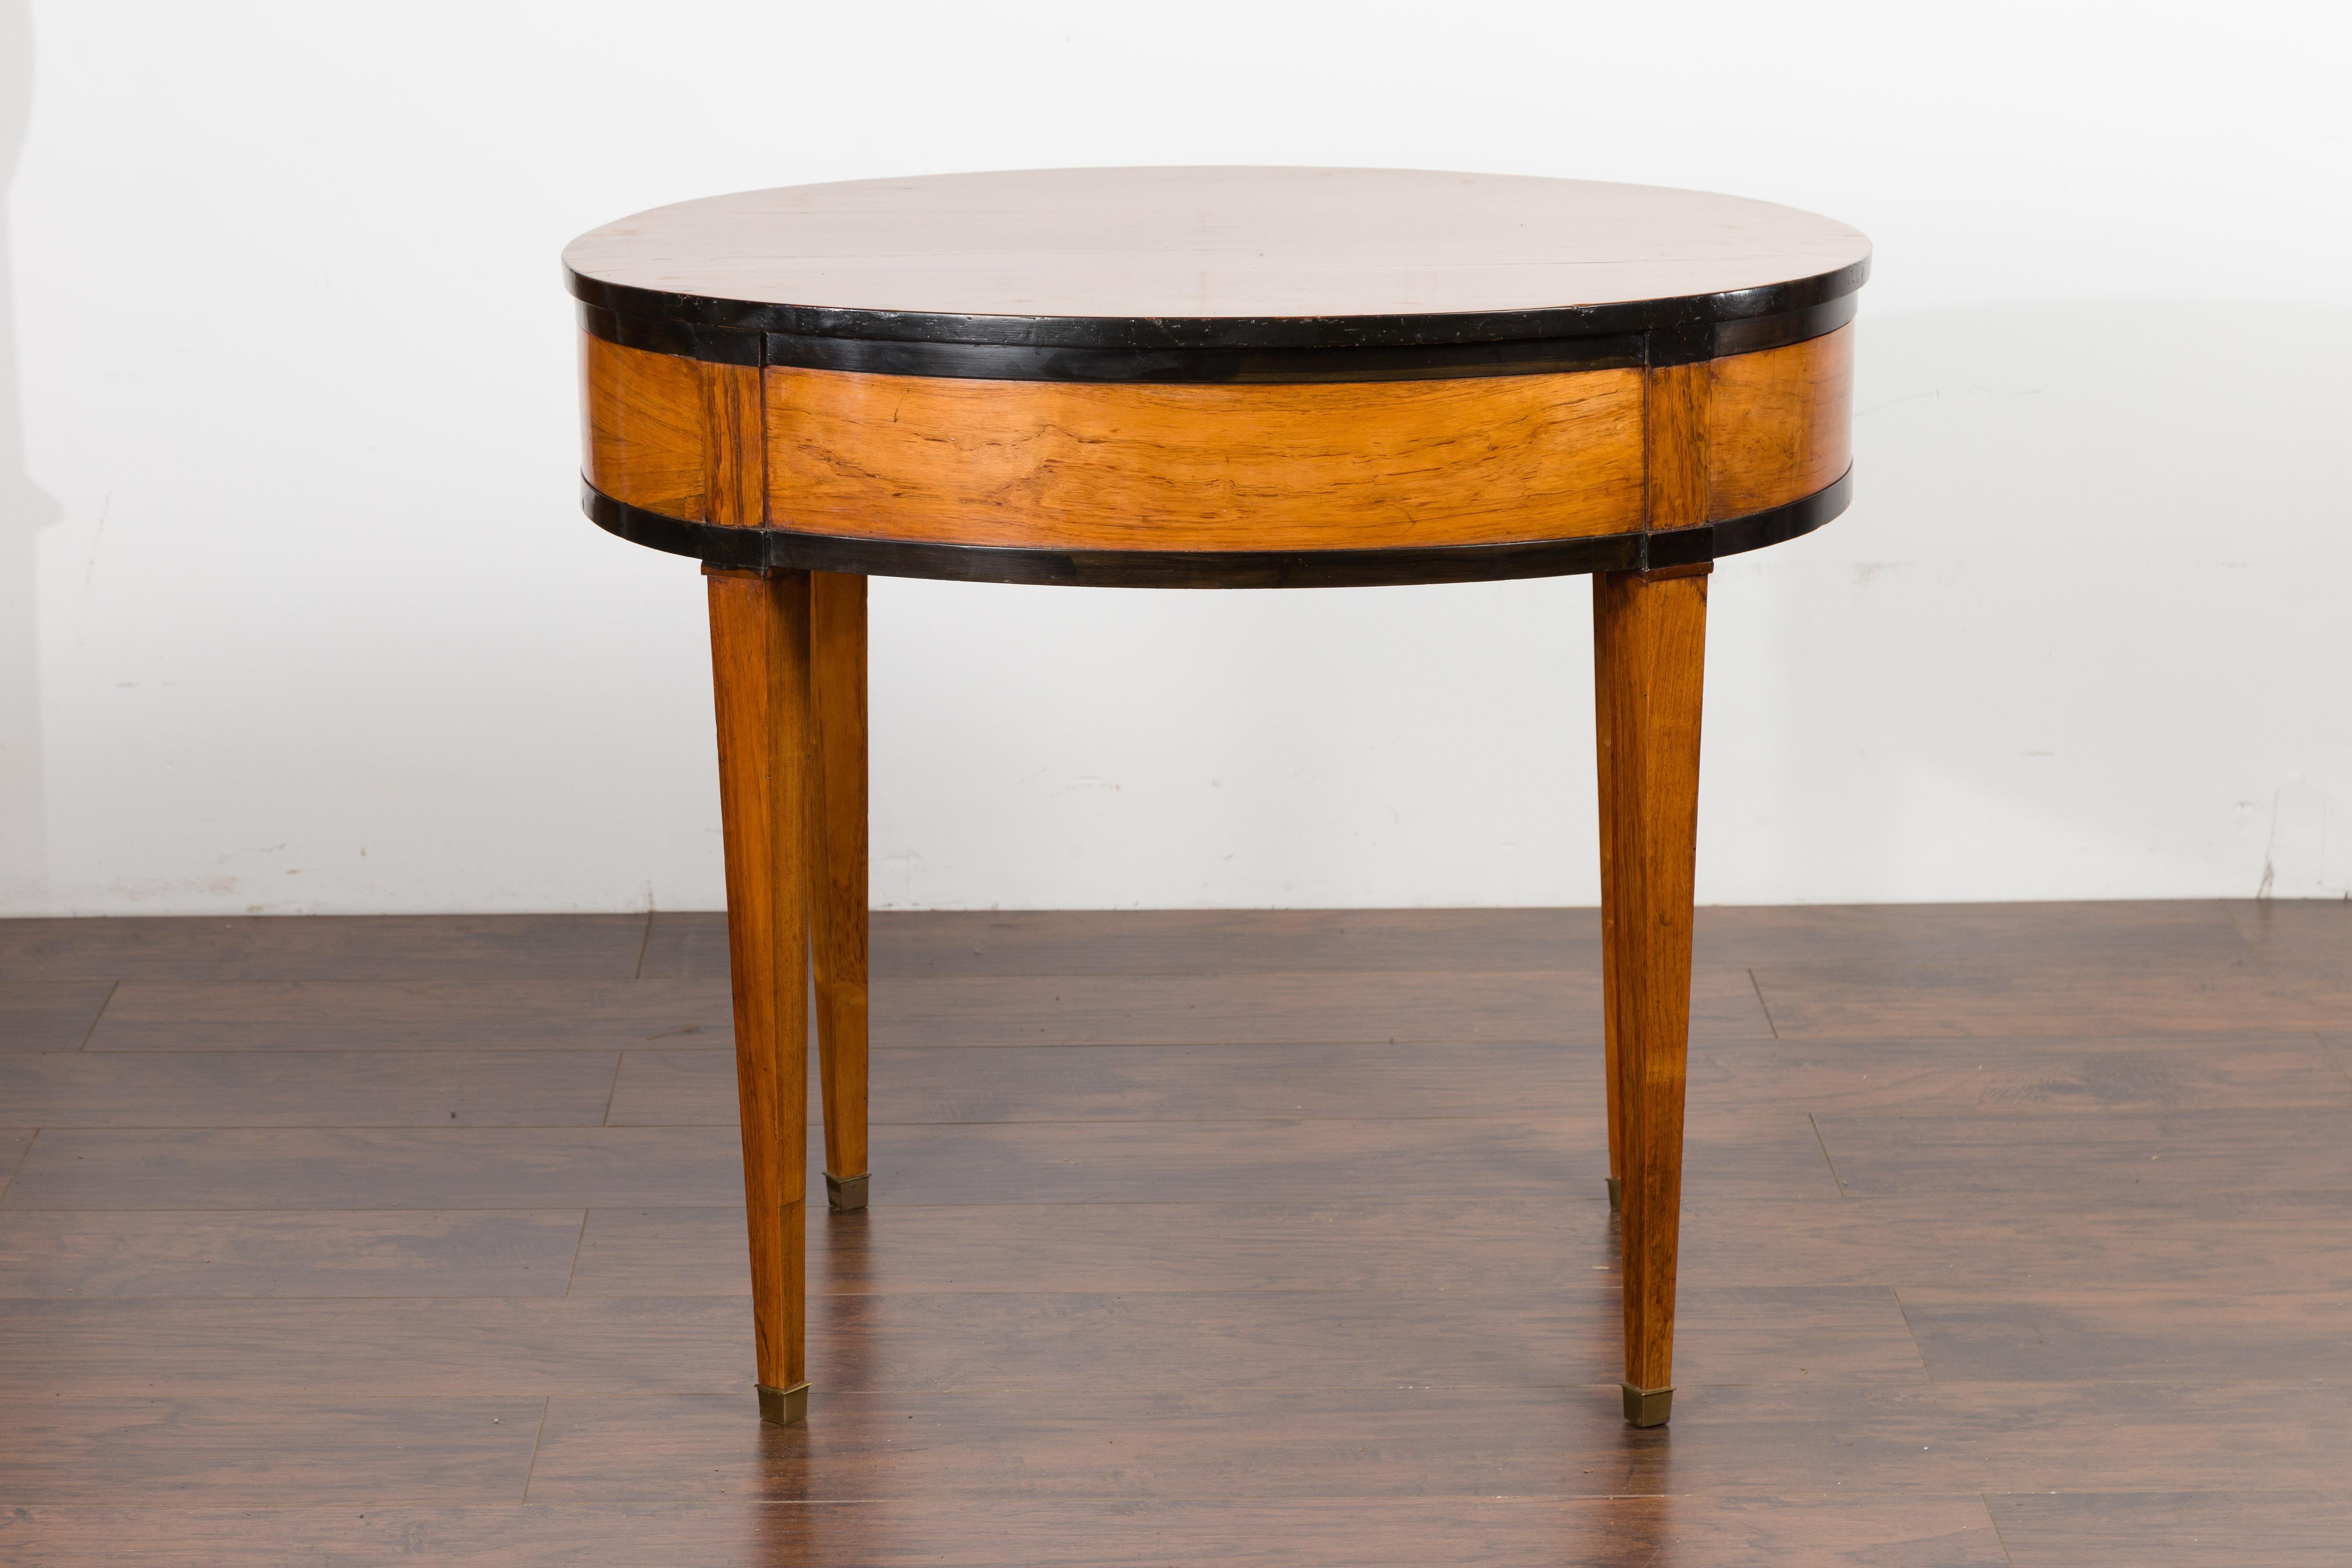 Austrian 1840s Biedermeier Oval Top Table with Drawer and Ebonized Accents 7